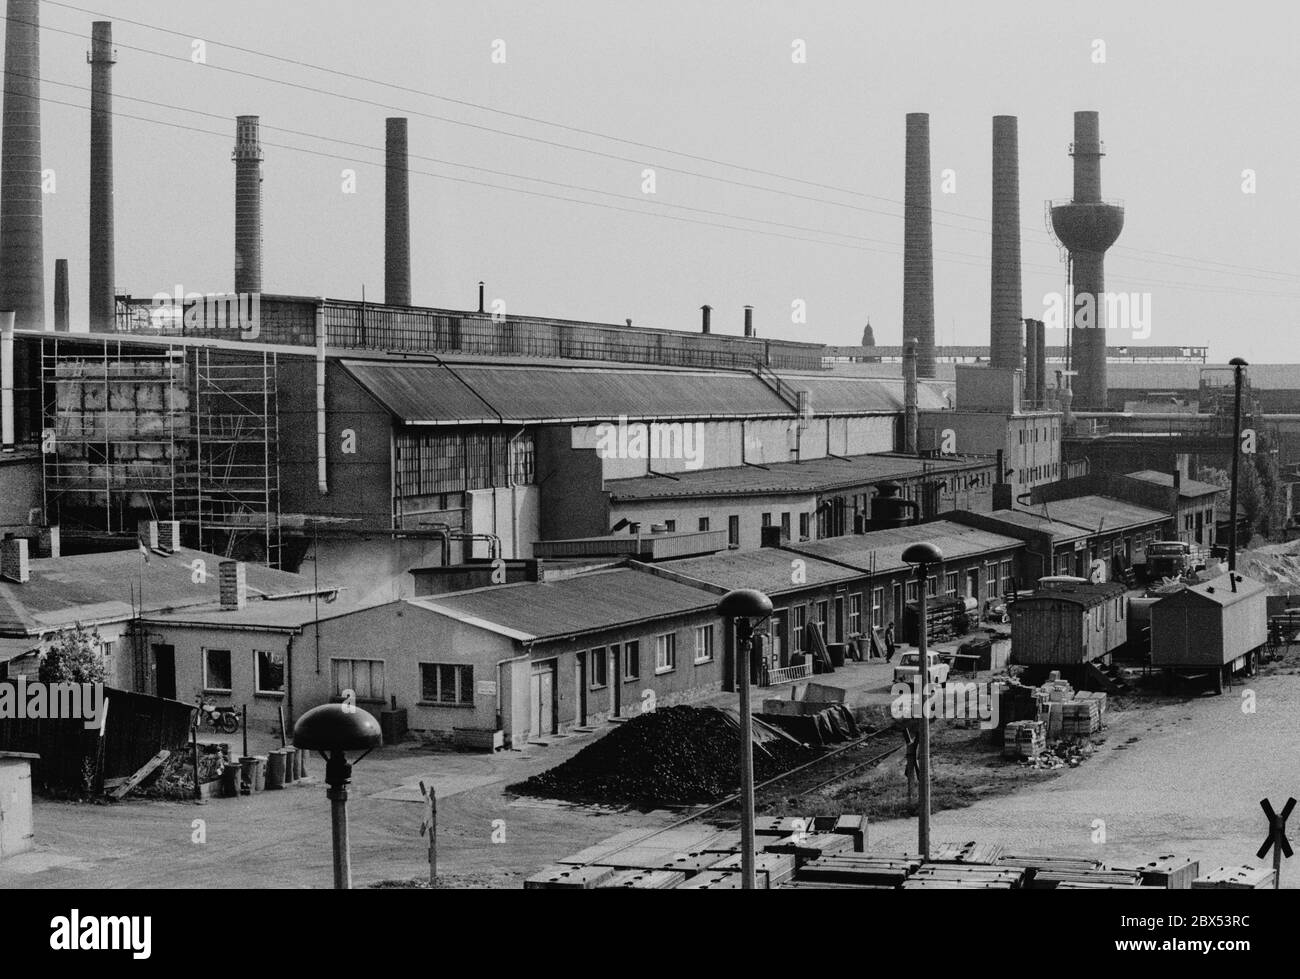 Saxony / Industry / GDR state / 11.05.1990 Riesa: railway area and steelworks. It has been torn down in the meantime // Steel / GDR economy [automated translation] Stock Photo